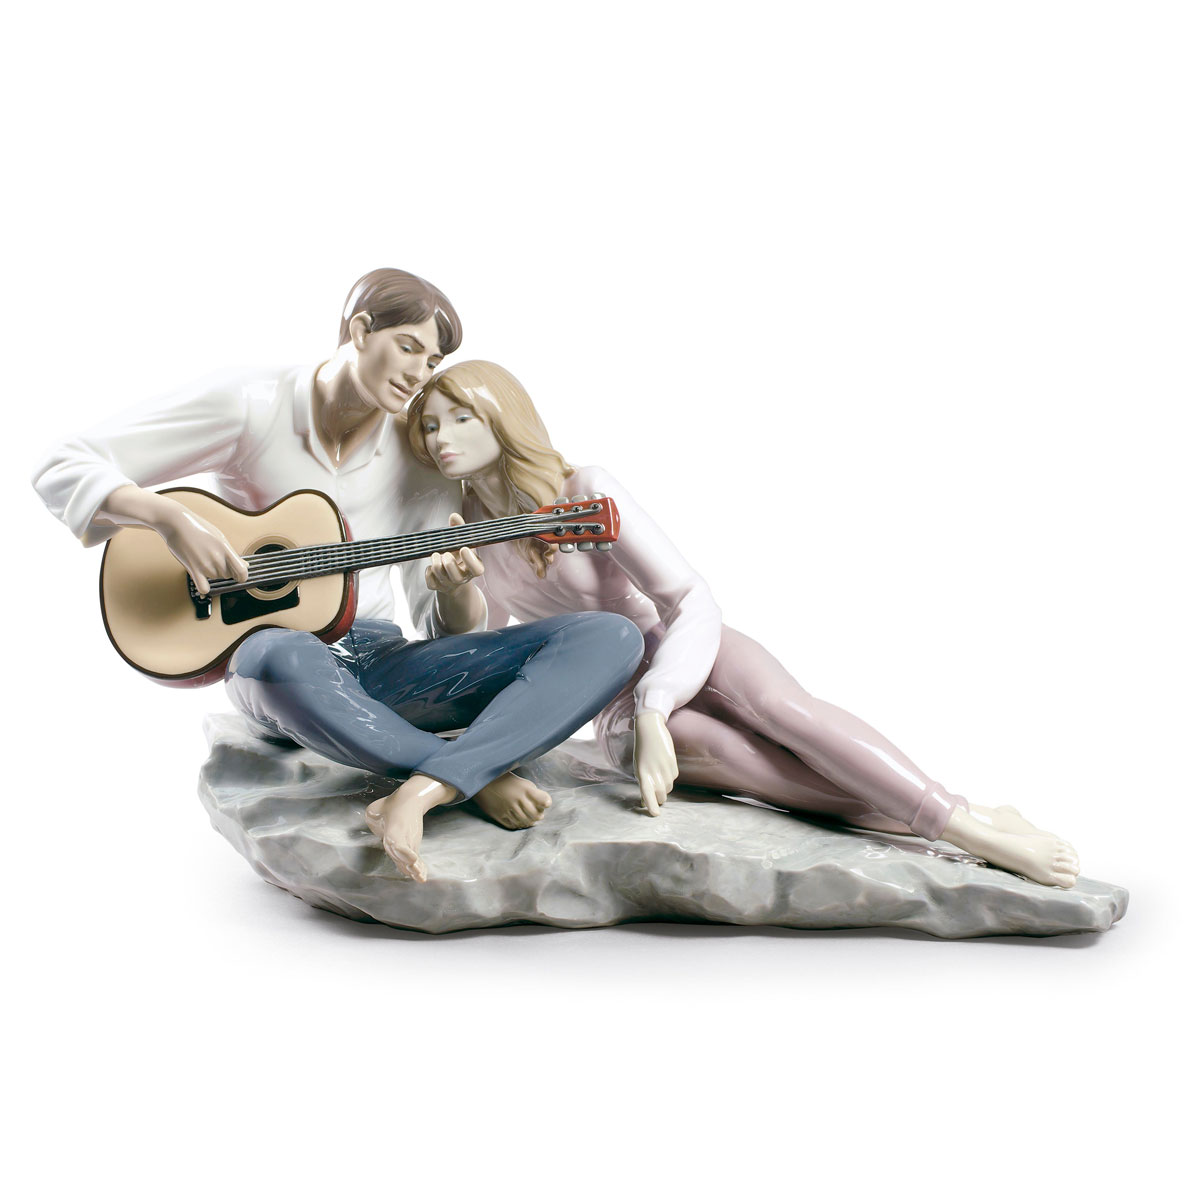 Lladro Classic Sculpture, Our Song Couple Figurine